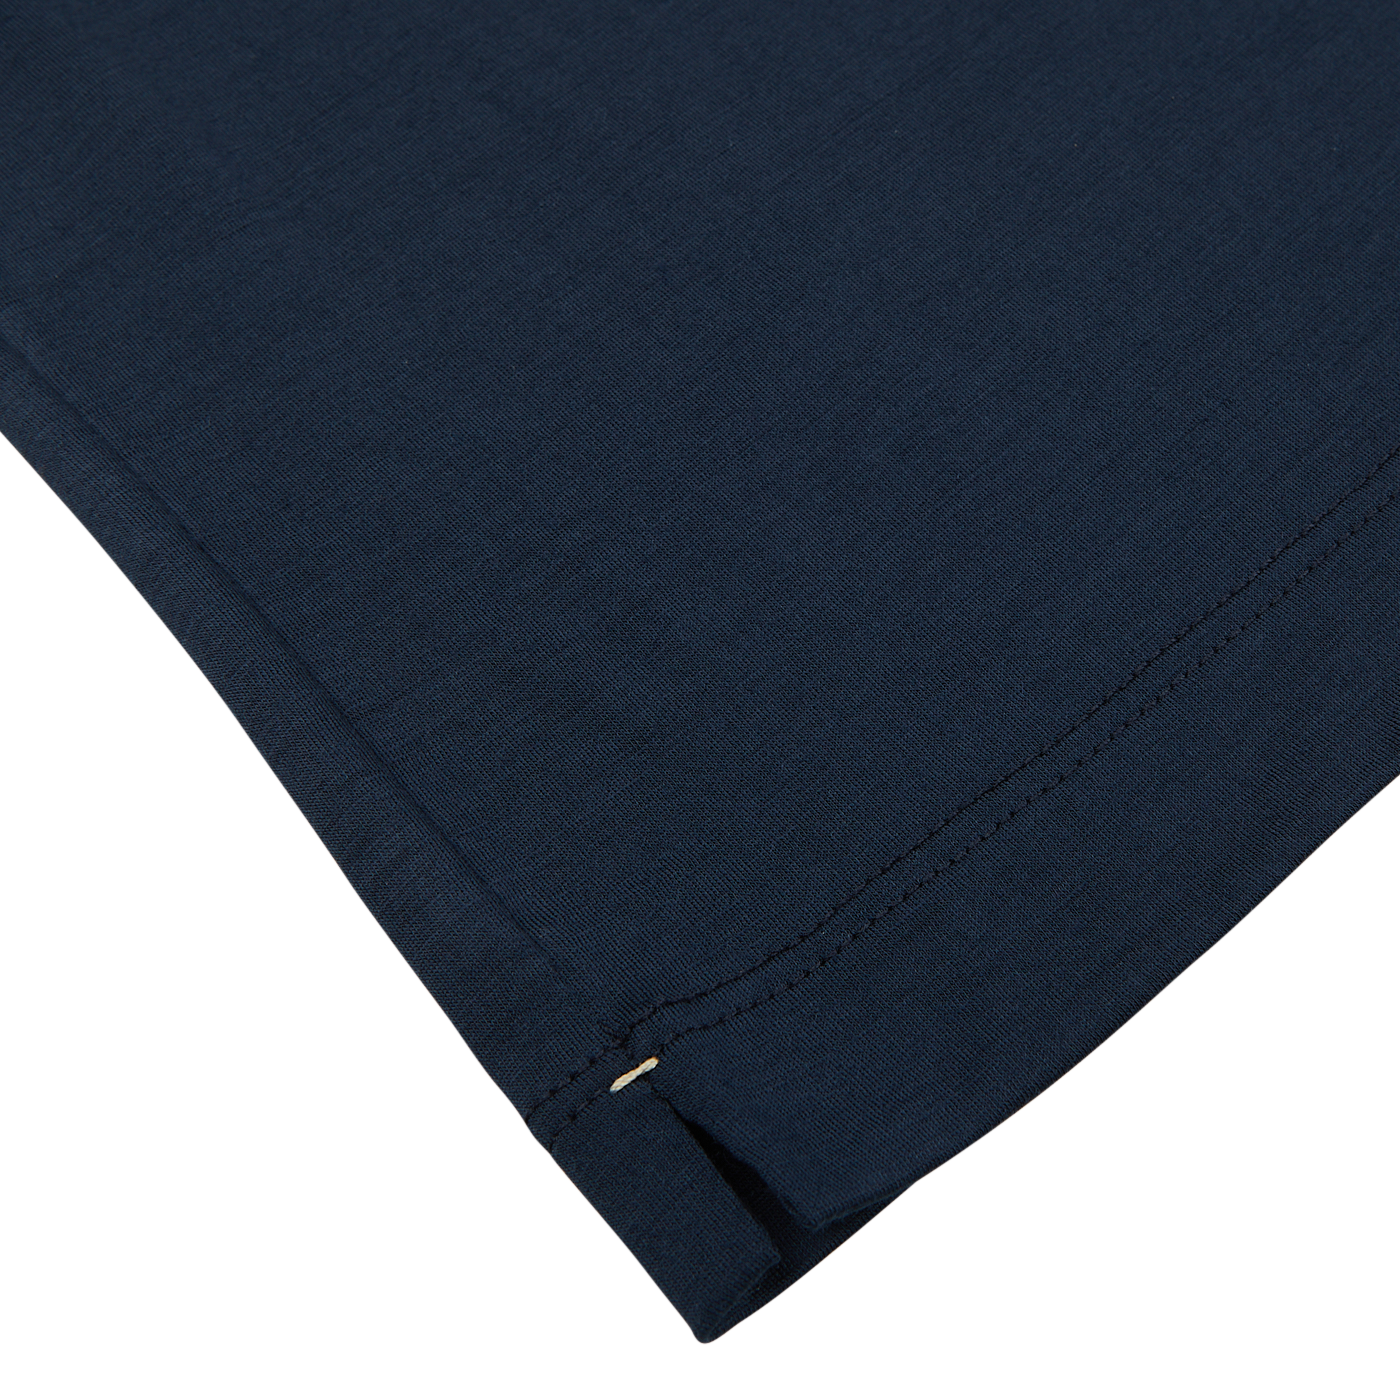 Close-up of a Mazzarelli navy blue Merino wool t-shirt with detailed stitching and a small safety pin on the edge.